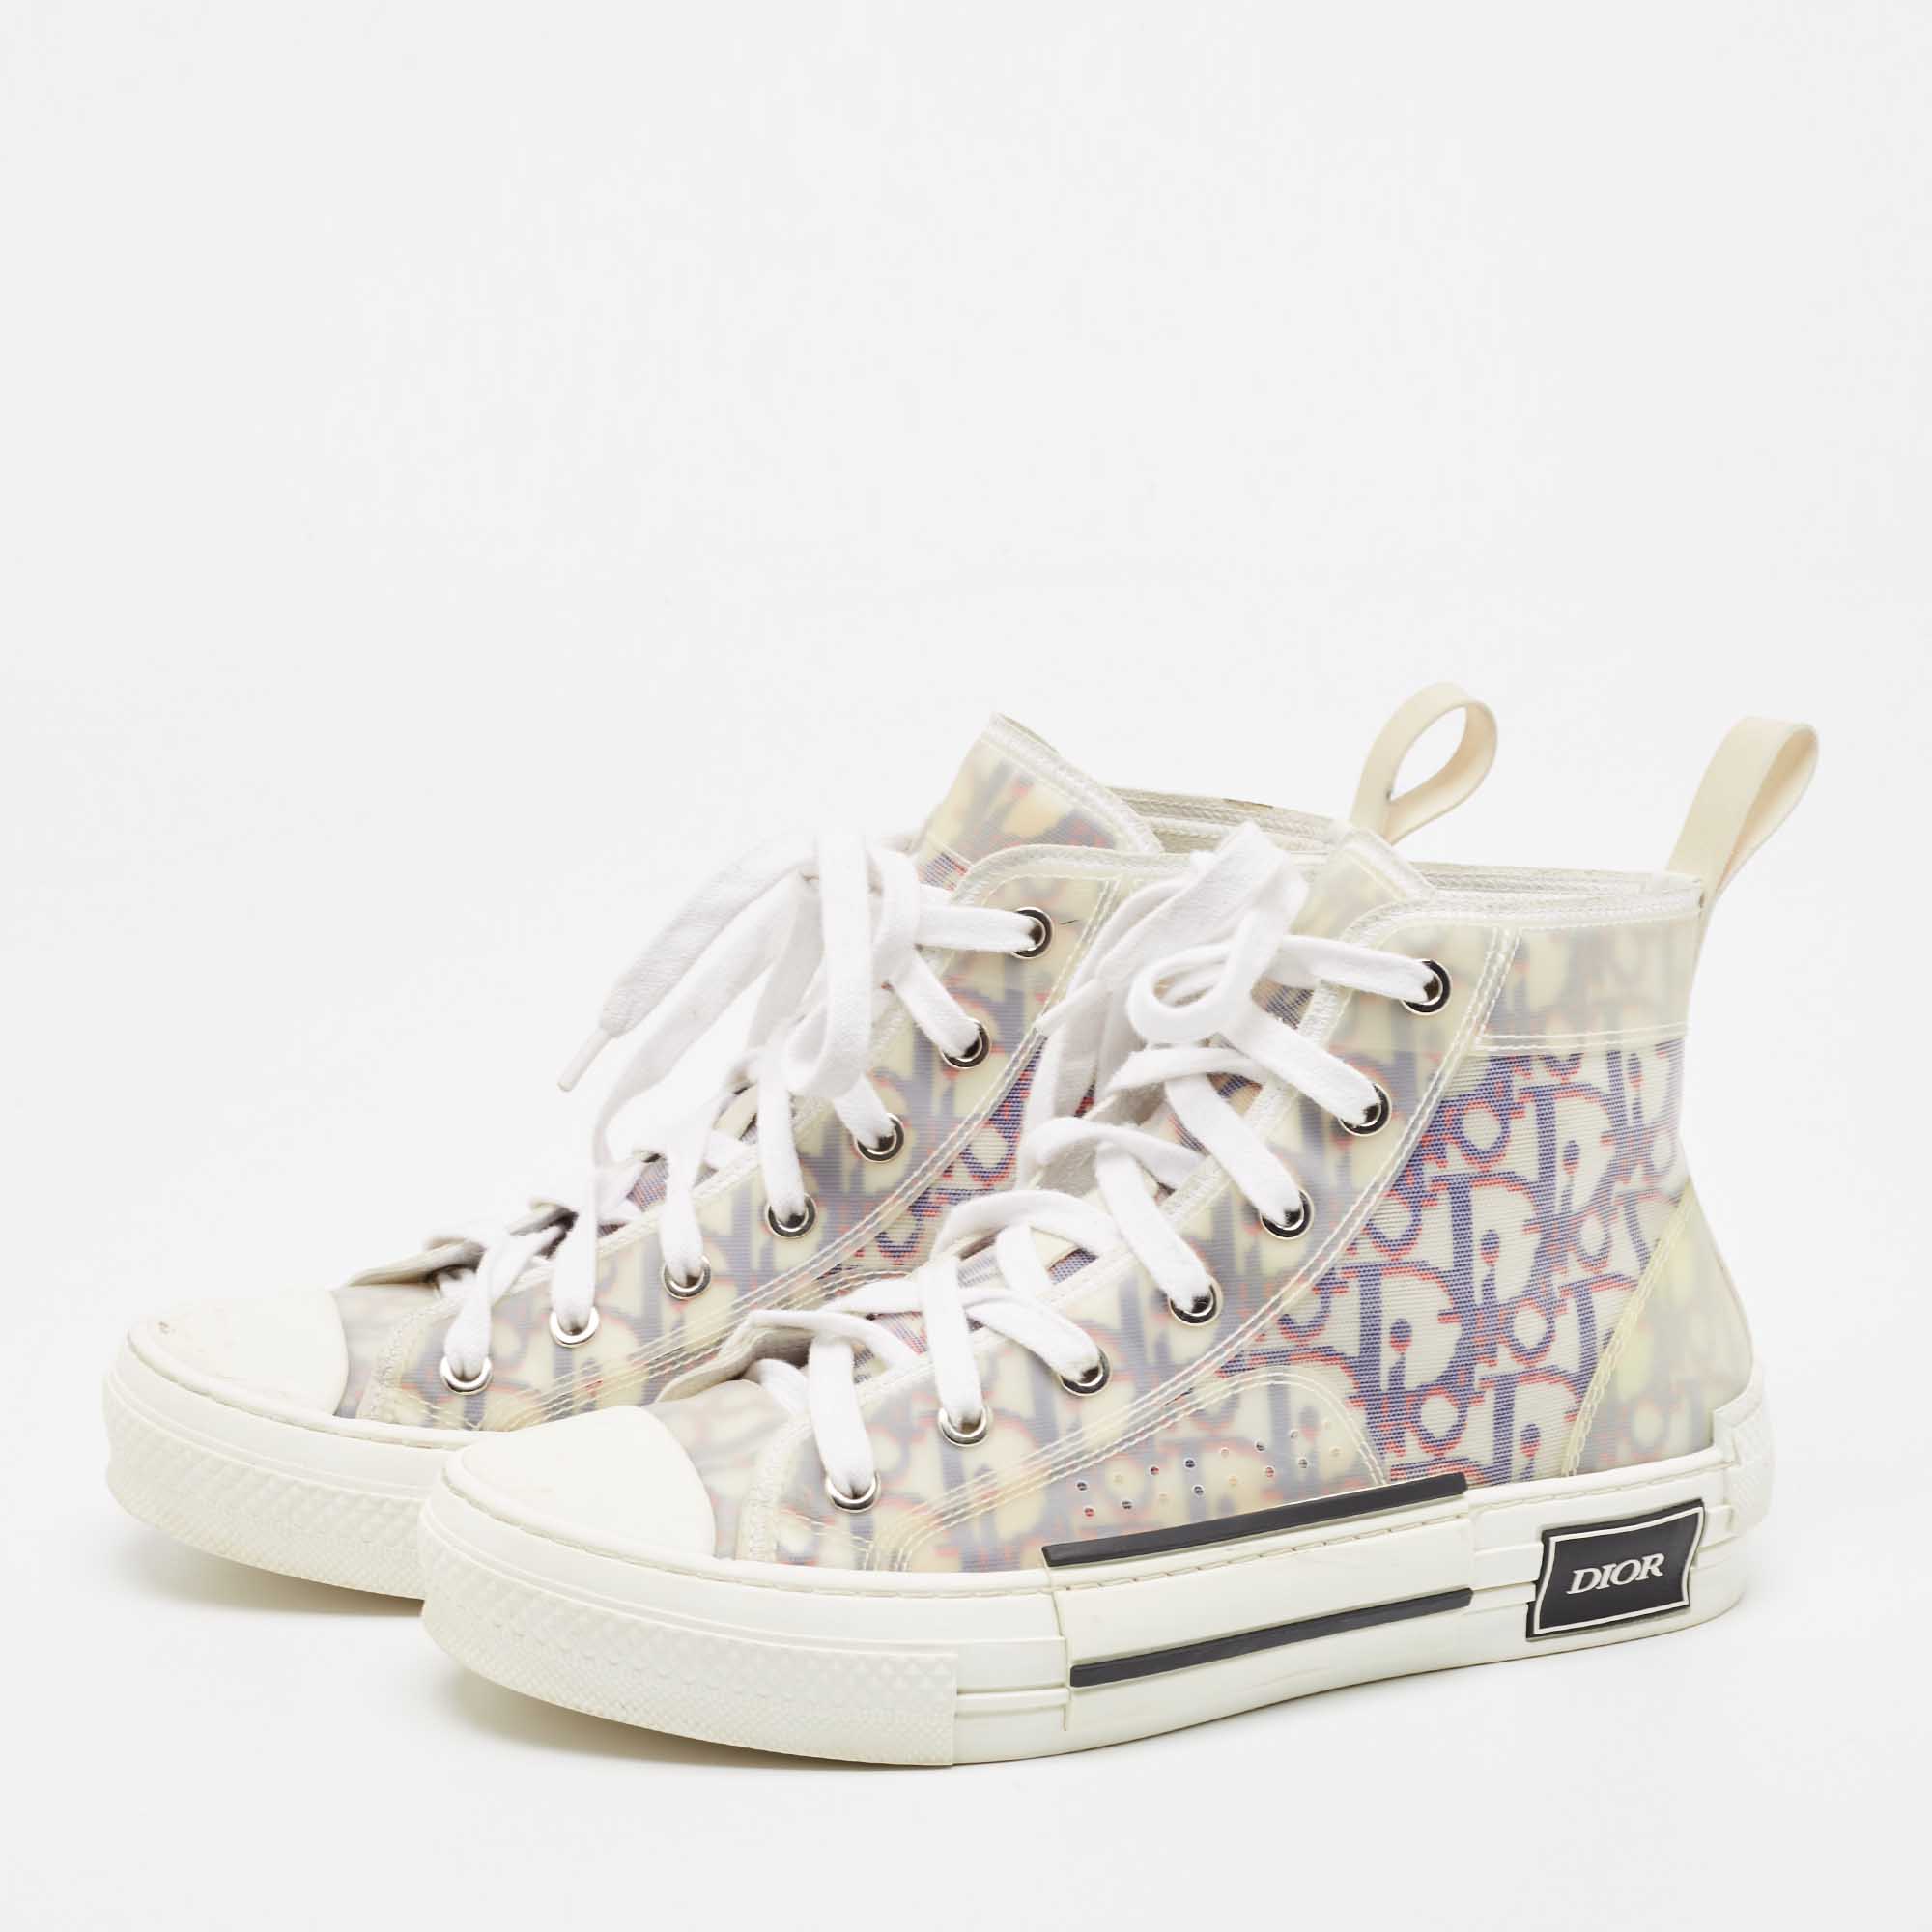 

Dior White/Black PVC And Oblique Mesh B23 High-Top Sneakers Size